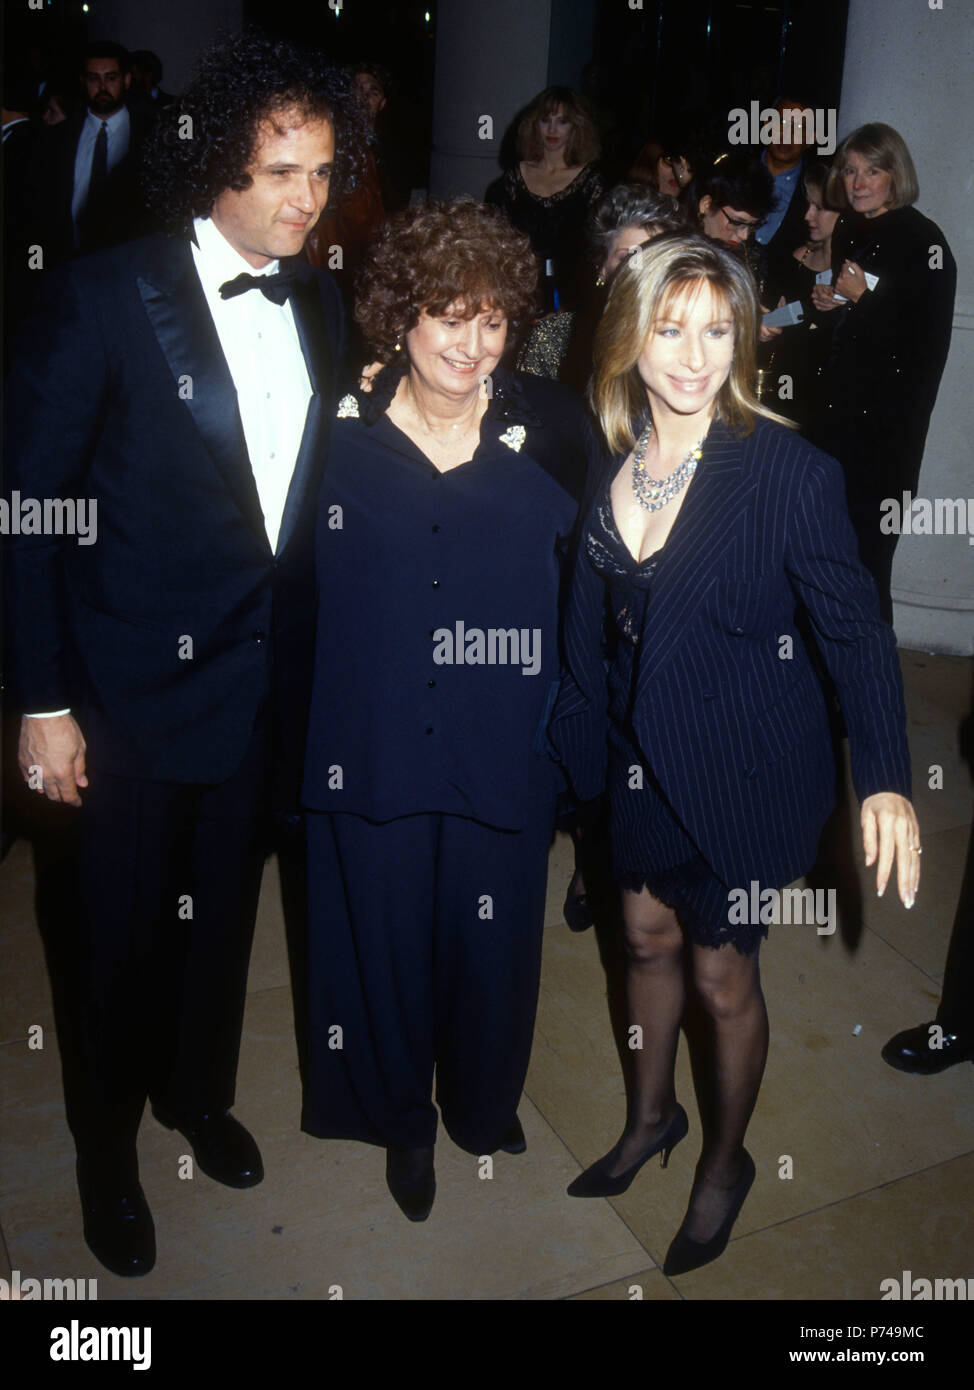 BEVERLY HILLS, CA - JANUARY 18: (L-R) Composer Richard Baskin, guest and Singer/actress Barbra Streisand attend the 49th Annual Golden Globe Awards on January 18, 1992 at the Beverly Hilton Hotel in Beverly Hills, California. Photo by Barry King/Alamy Stock Photo Stock Photo